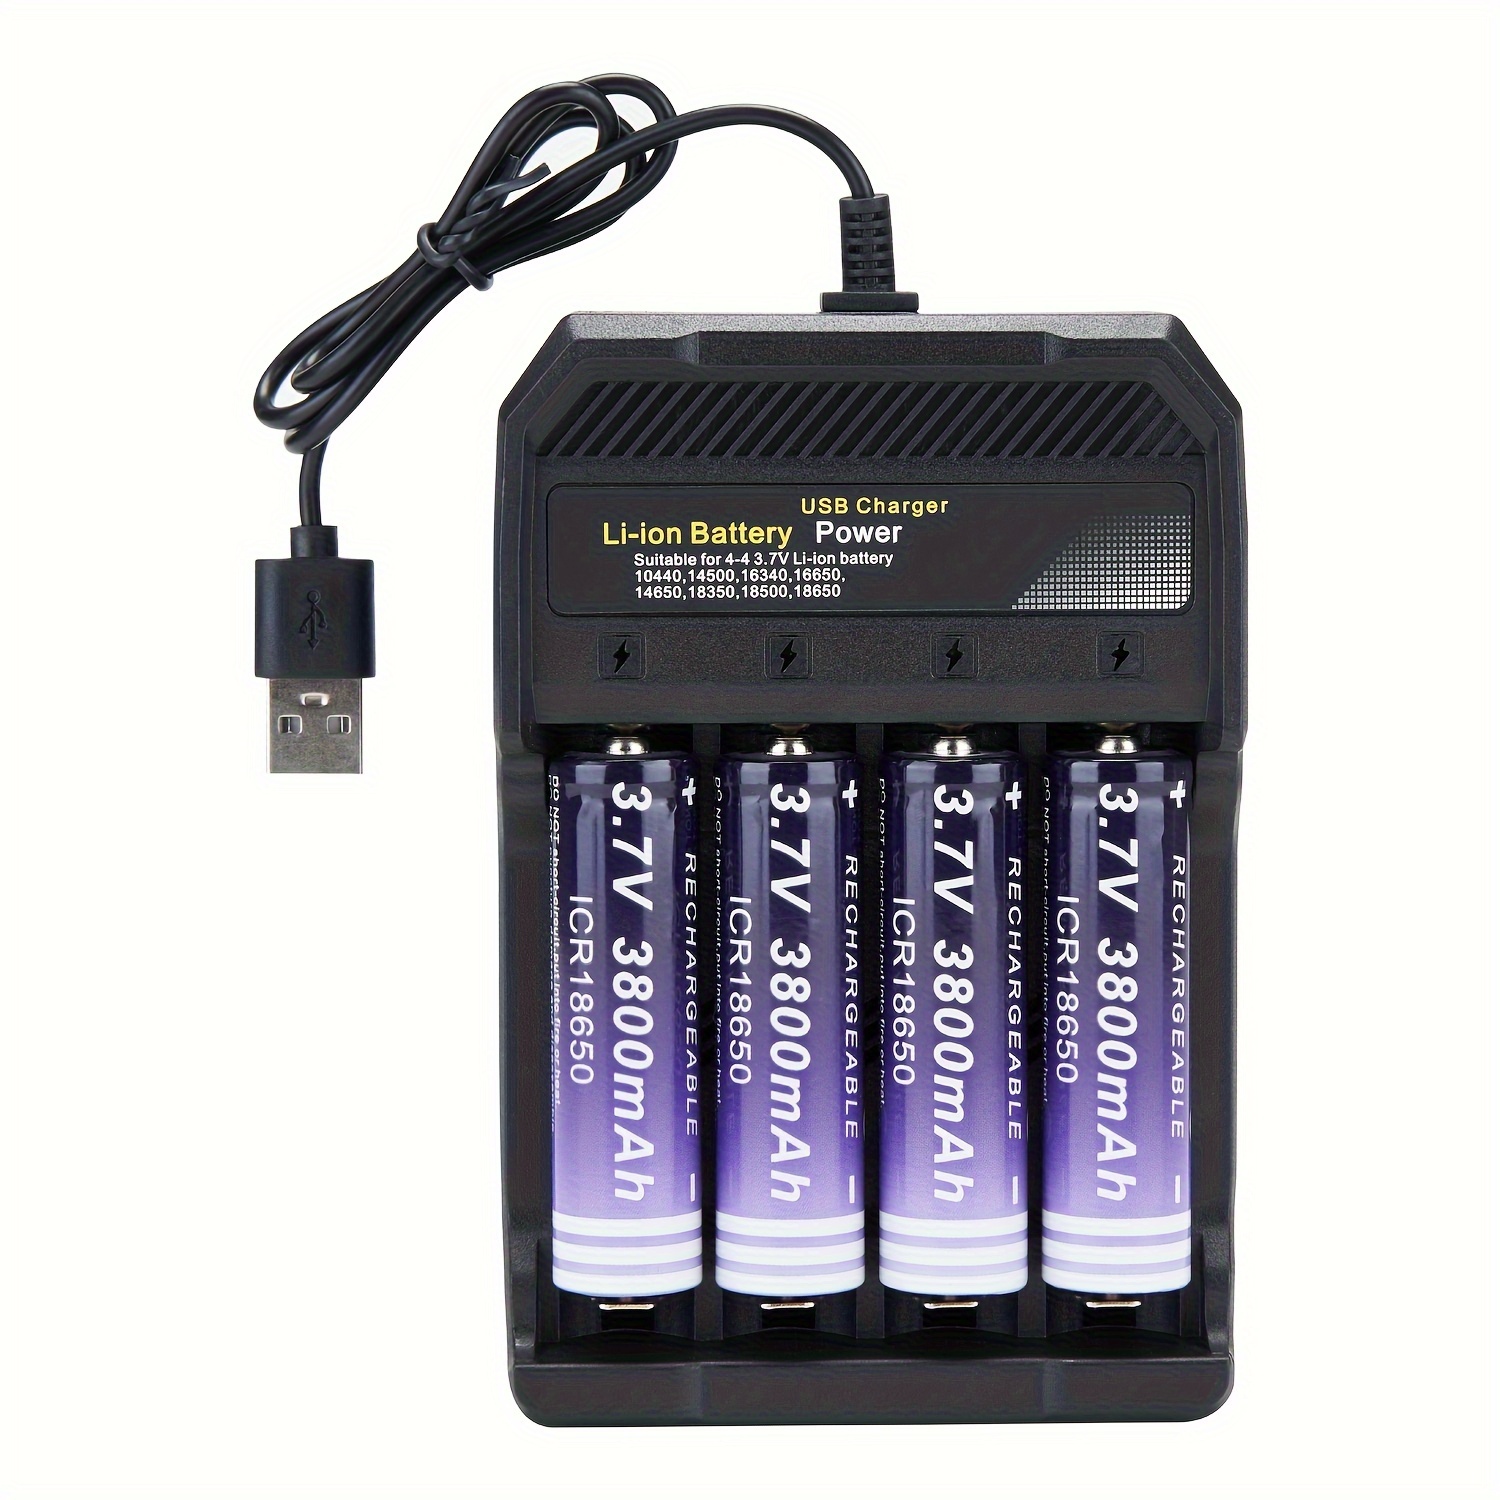 

4-bay 18650 Battery Charger+4 Pcs 3800mah Rechargeable 18650 Battery, Universal Smart Battery Charger For 18650 26650 14500 16340 18500 10440 18350 17670 3.7v Batteries